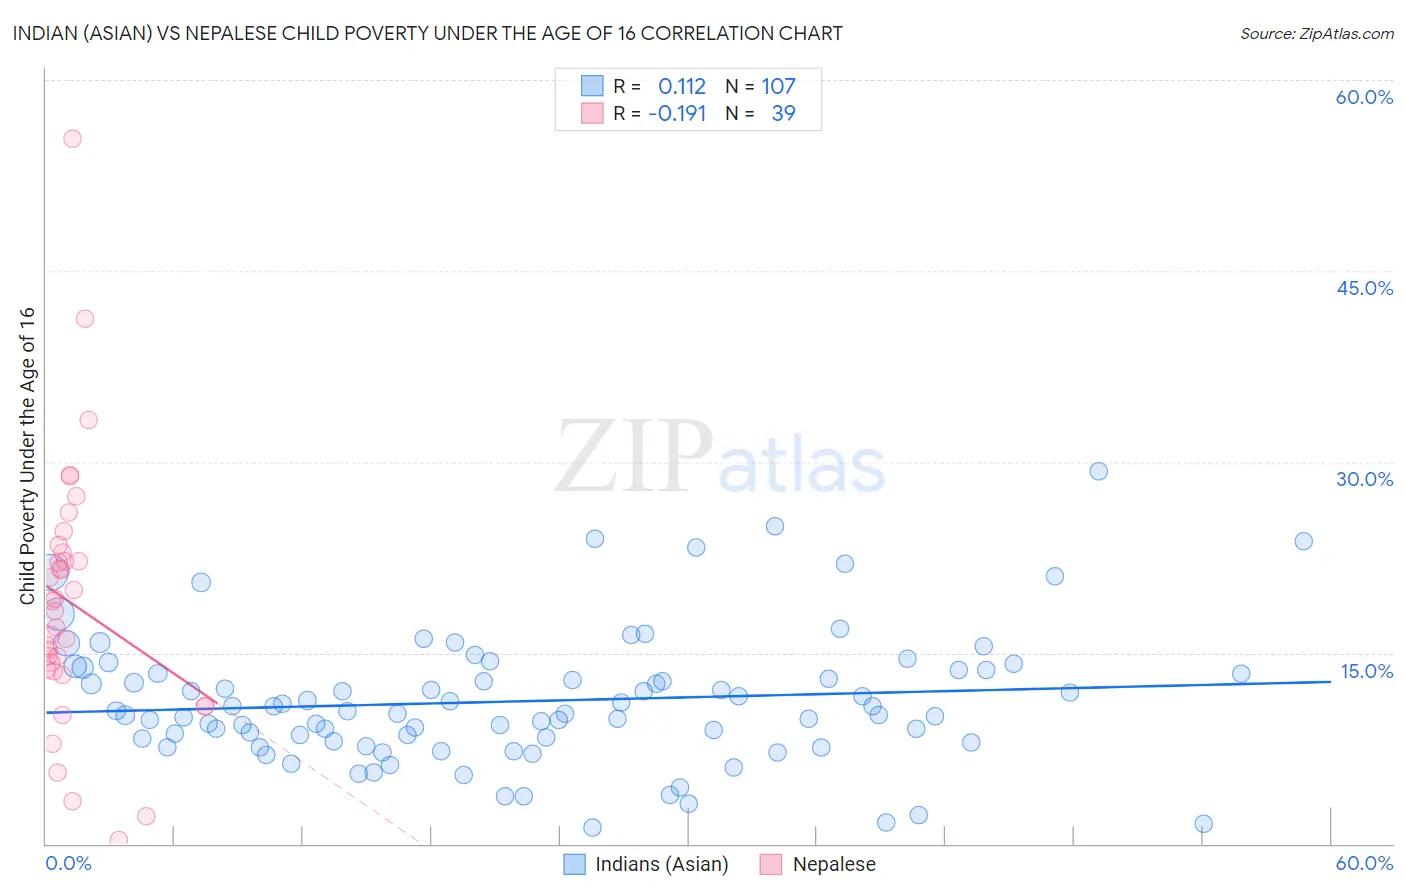 Indian (Asian) vs Nepalese Child Poverty Under the Age of 16